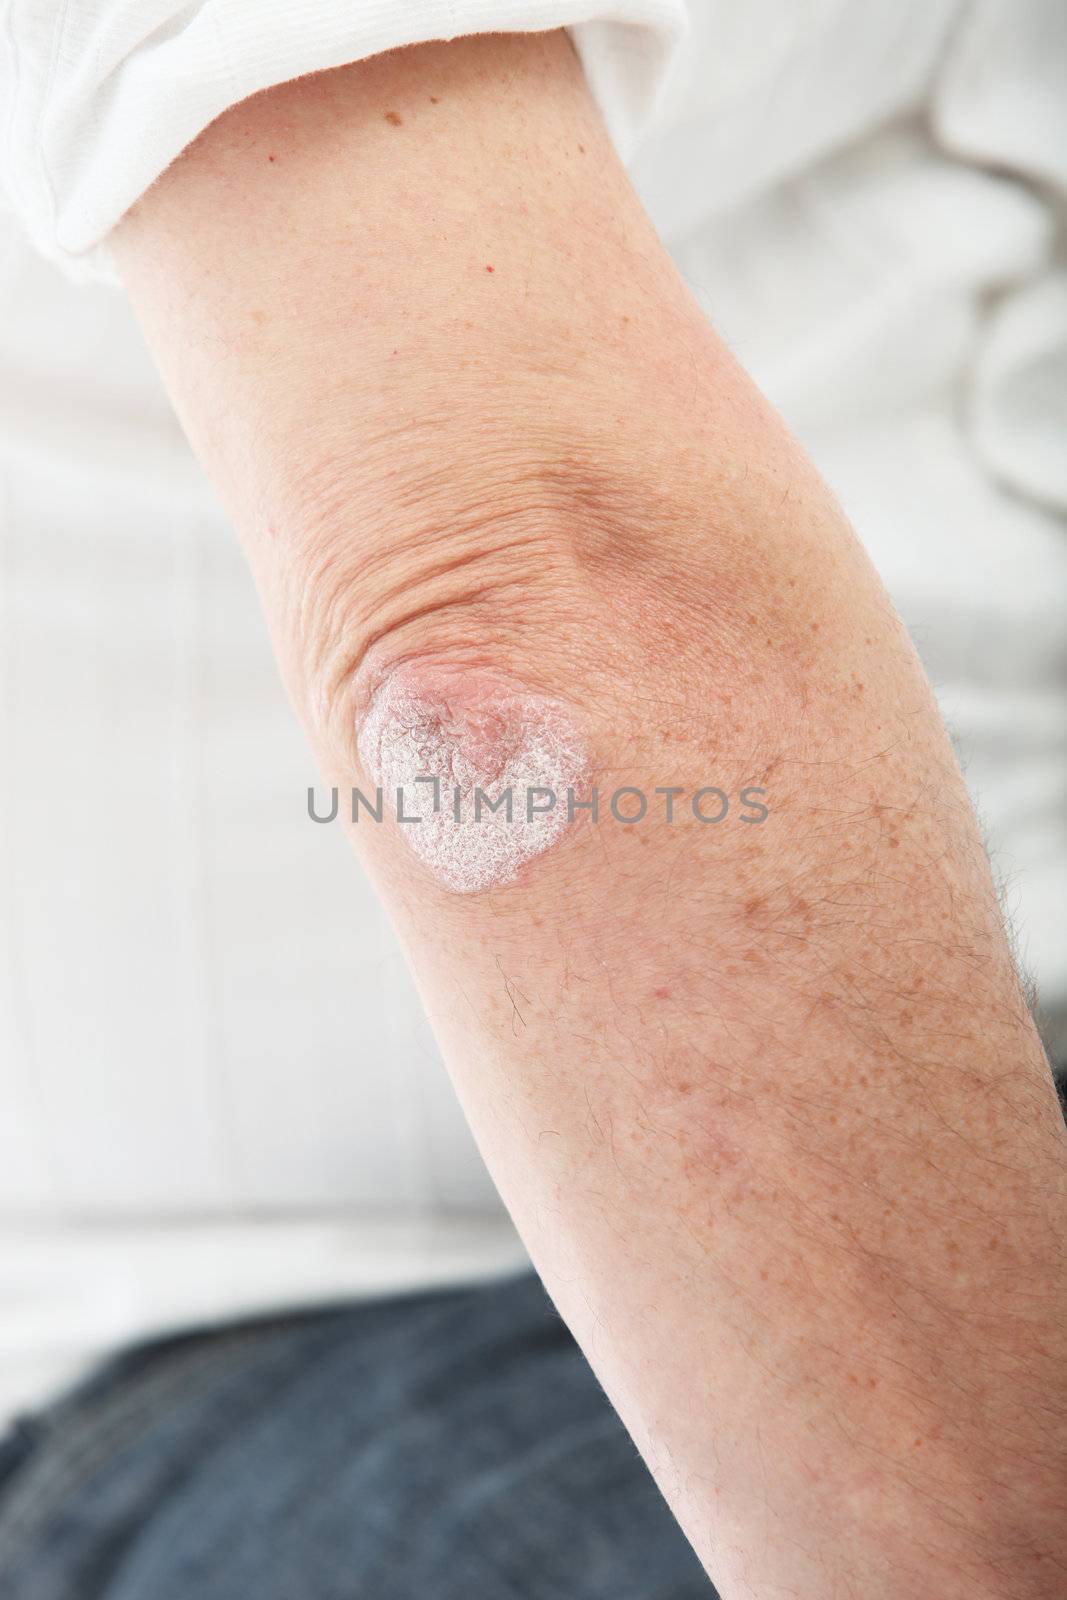 Psoriasis skin or deciding on the elbow by Farina6000